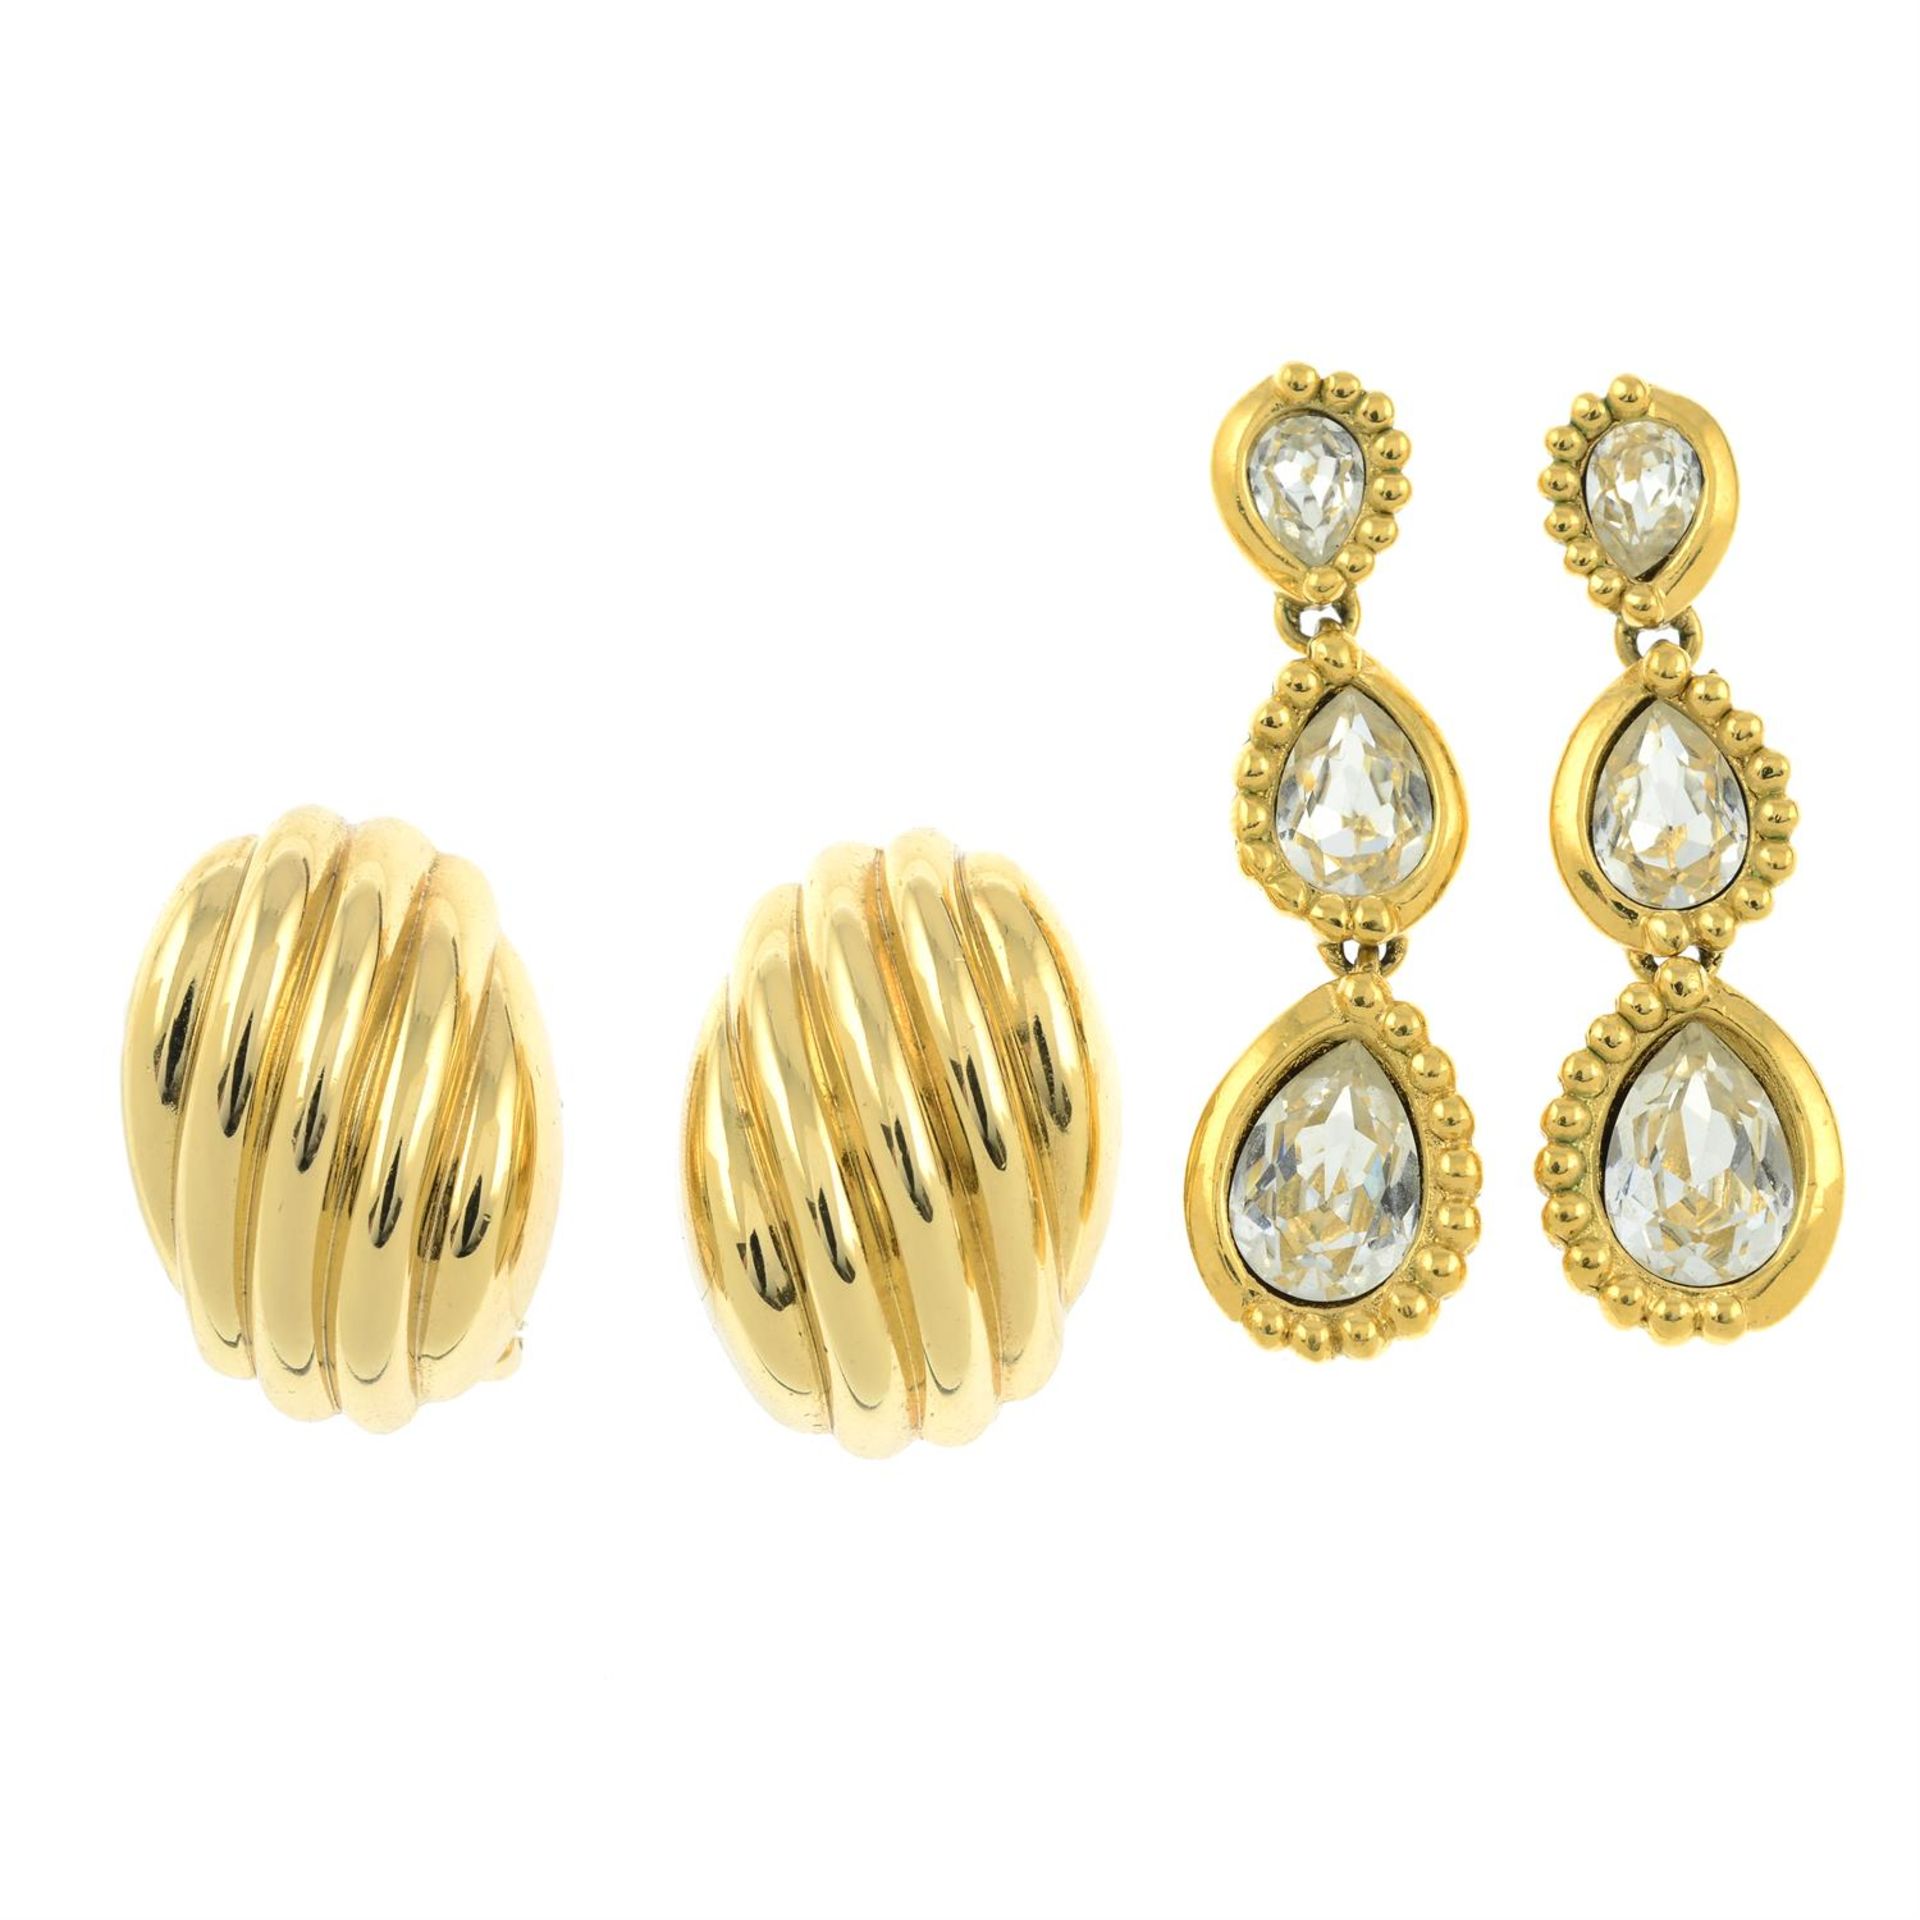 CHRISTIAN DIOR - two pairs of earrings.